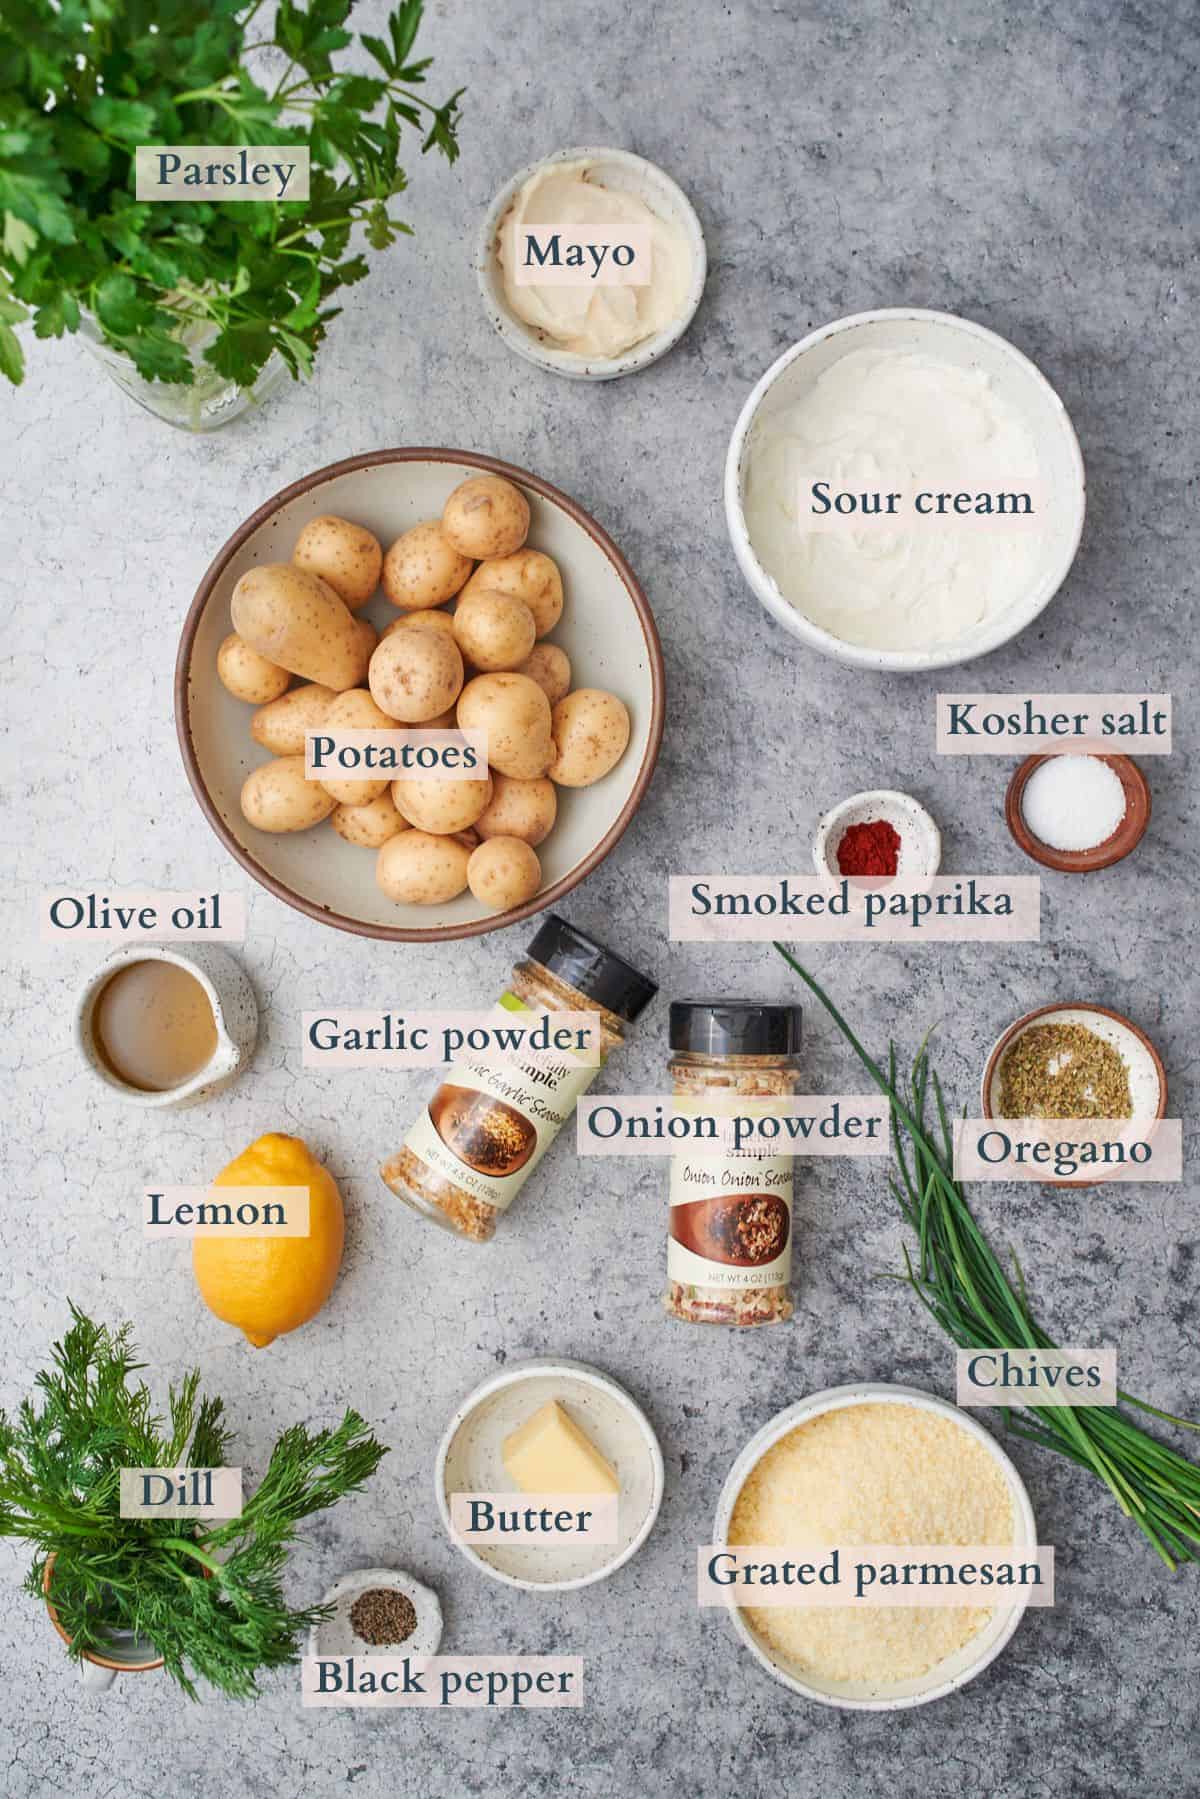 ingredients to make crispy parmesan potatoes laid out in small bowls and labeled to denote each ingredient.